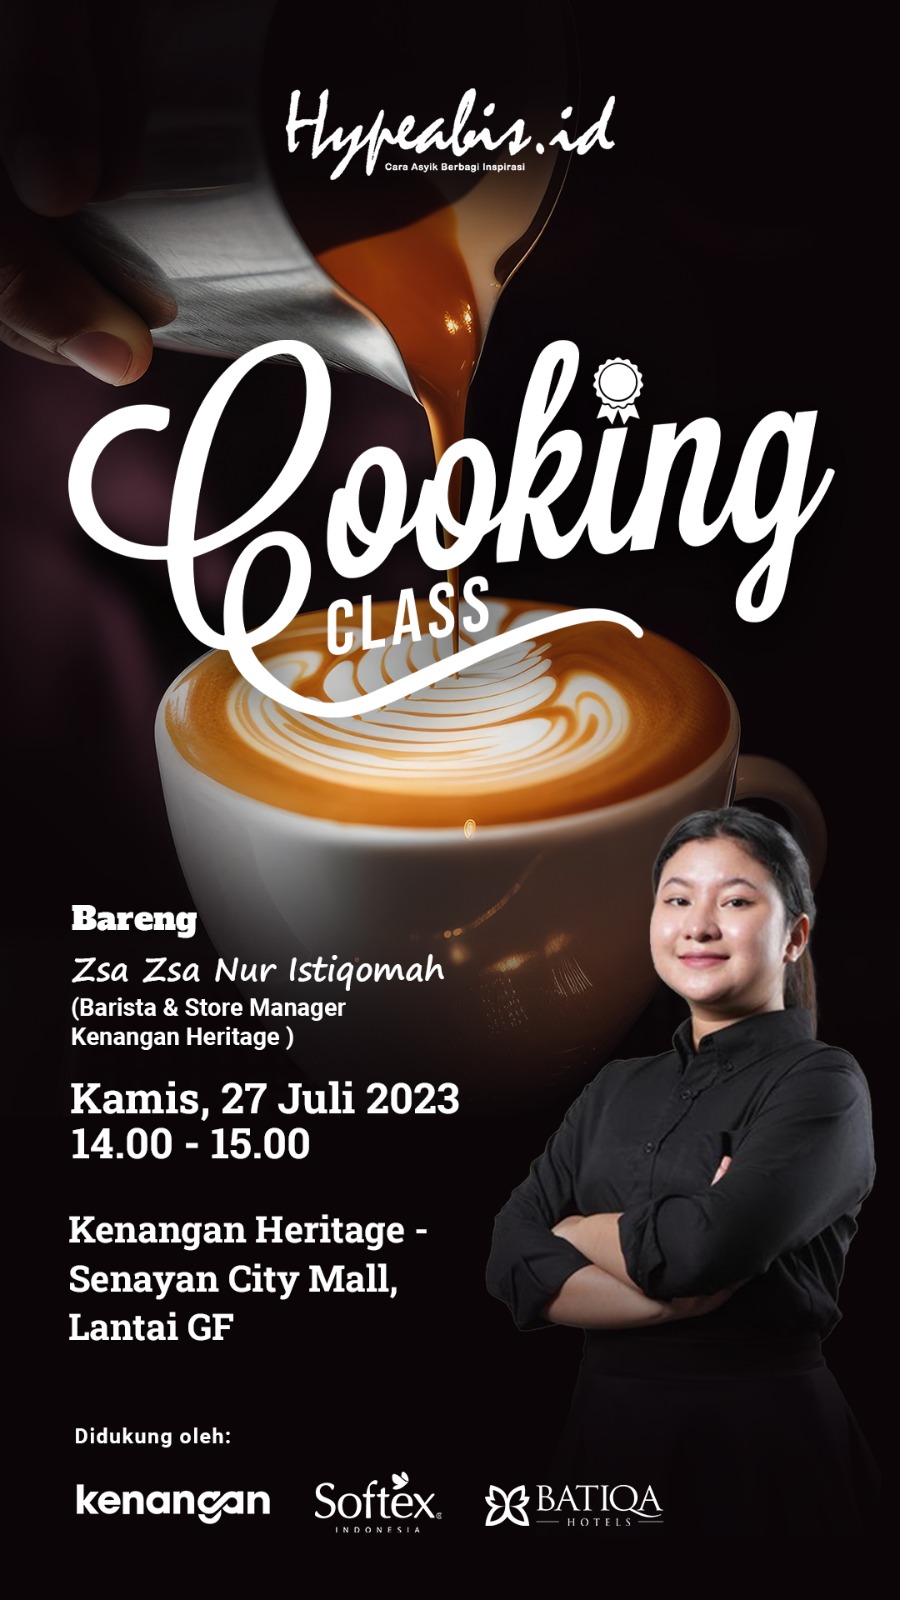 Cooking Class Hypeabis.id